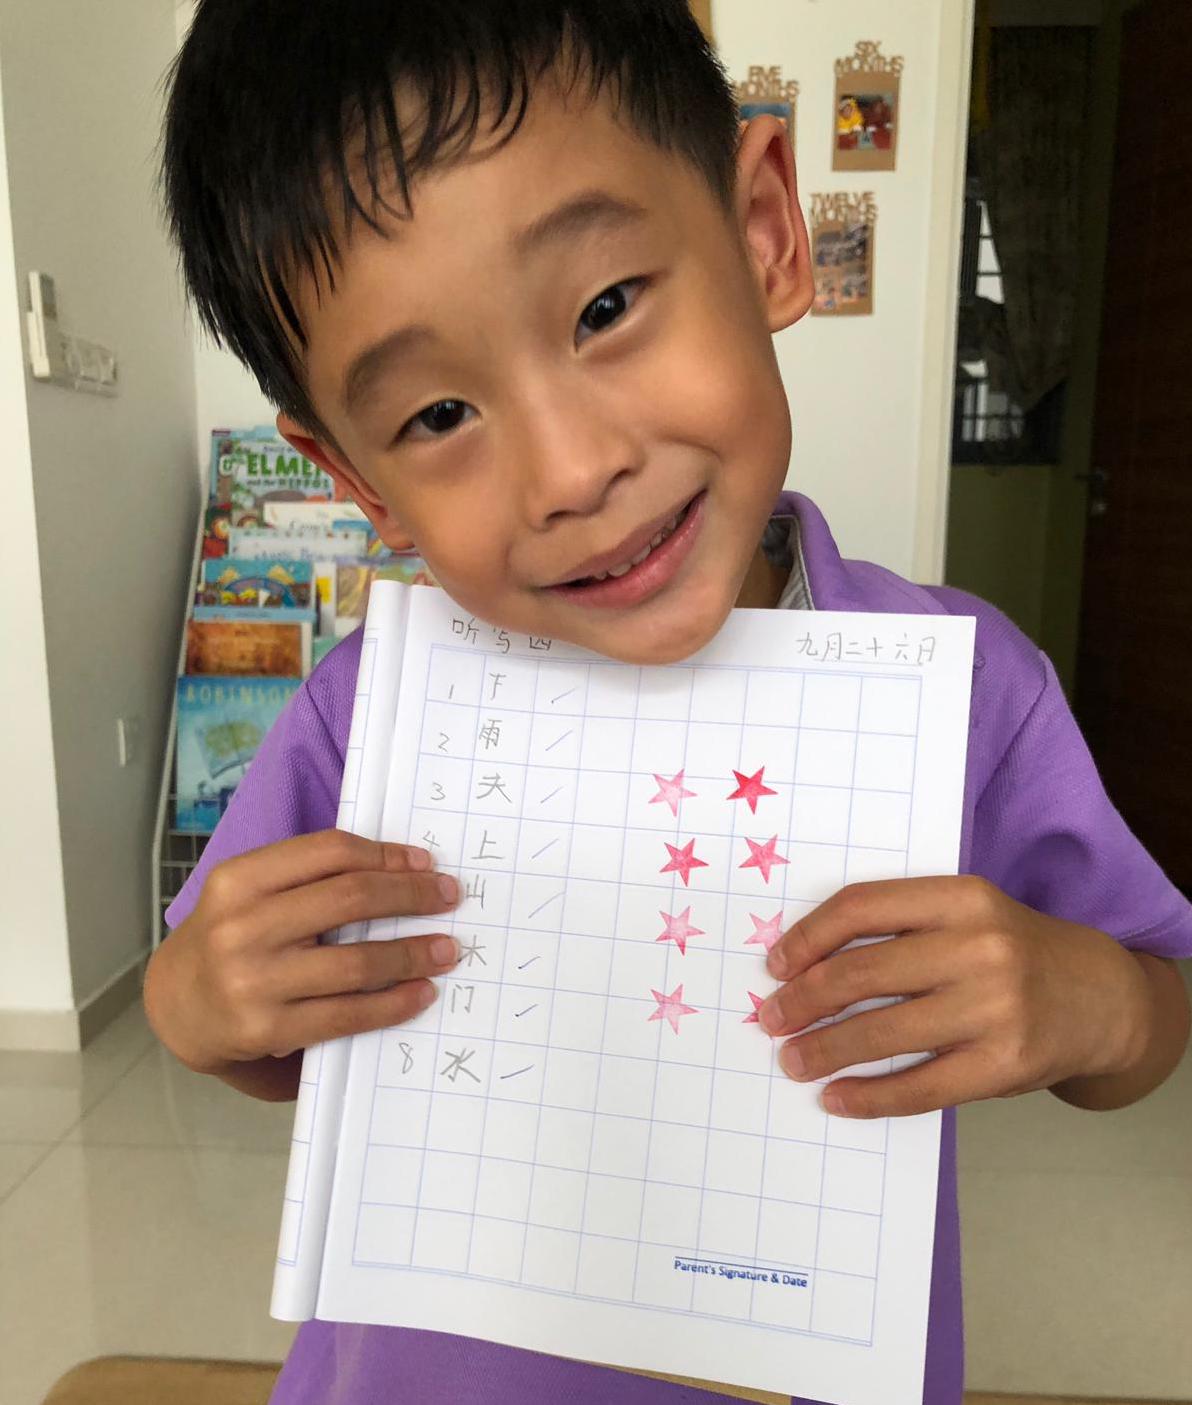 September 26, 2019: Ethan Ong scored full marks on his latest test – with "miraculously legible" handwriting, according to Pastor Felicia. Photo courtesy of Ps Felicia Goh-Ong